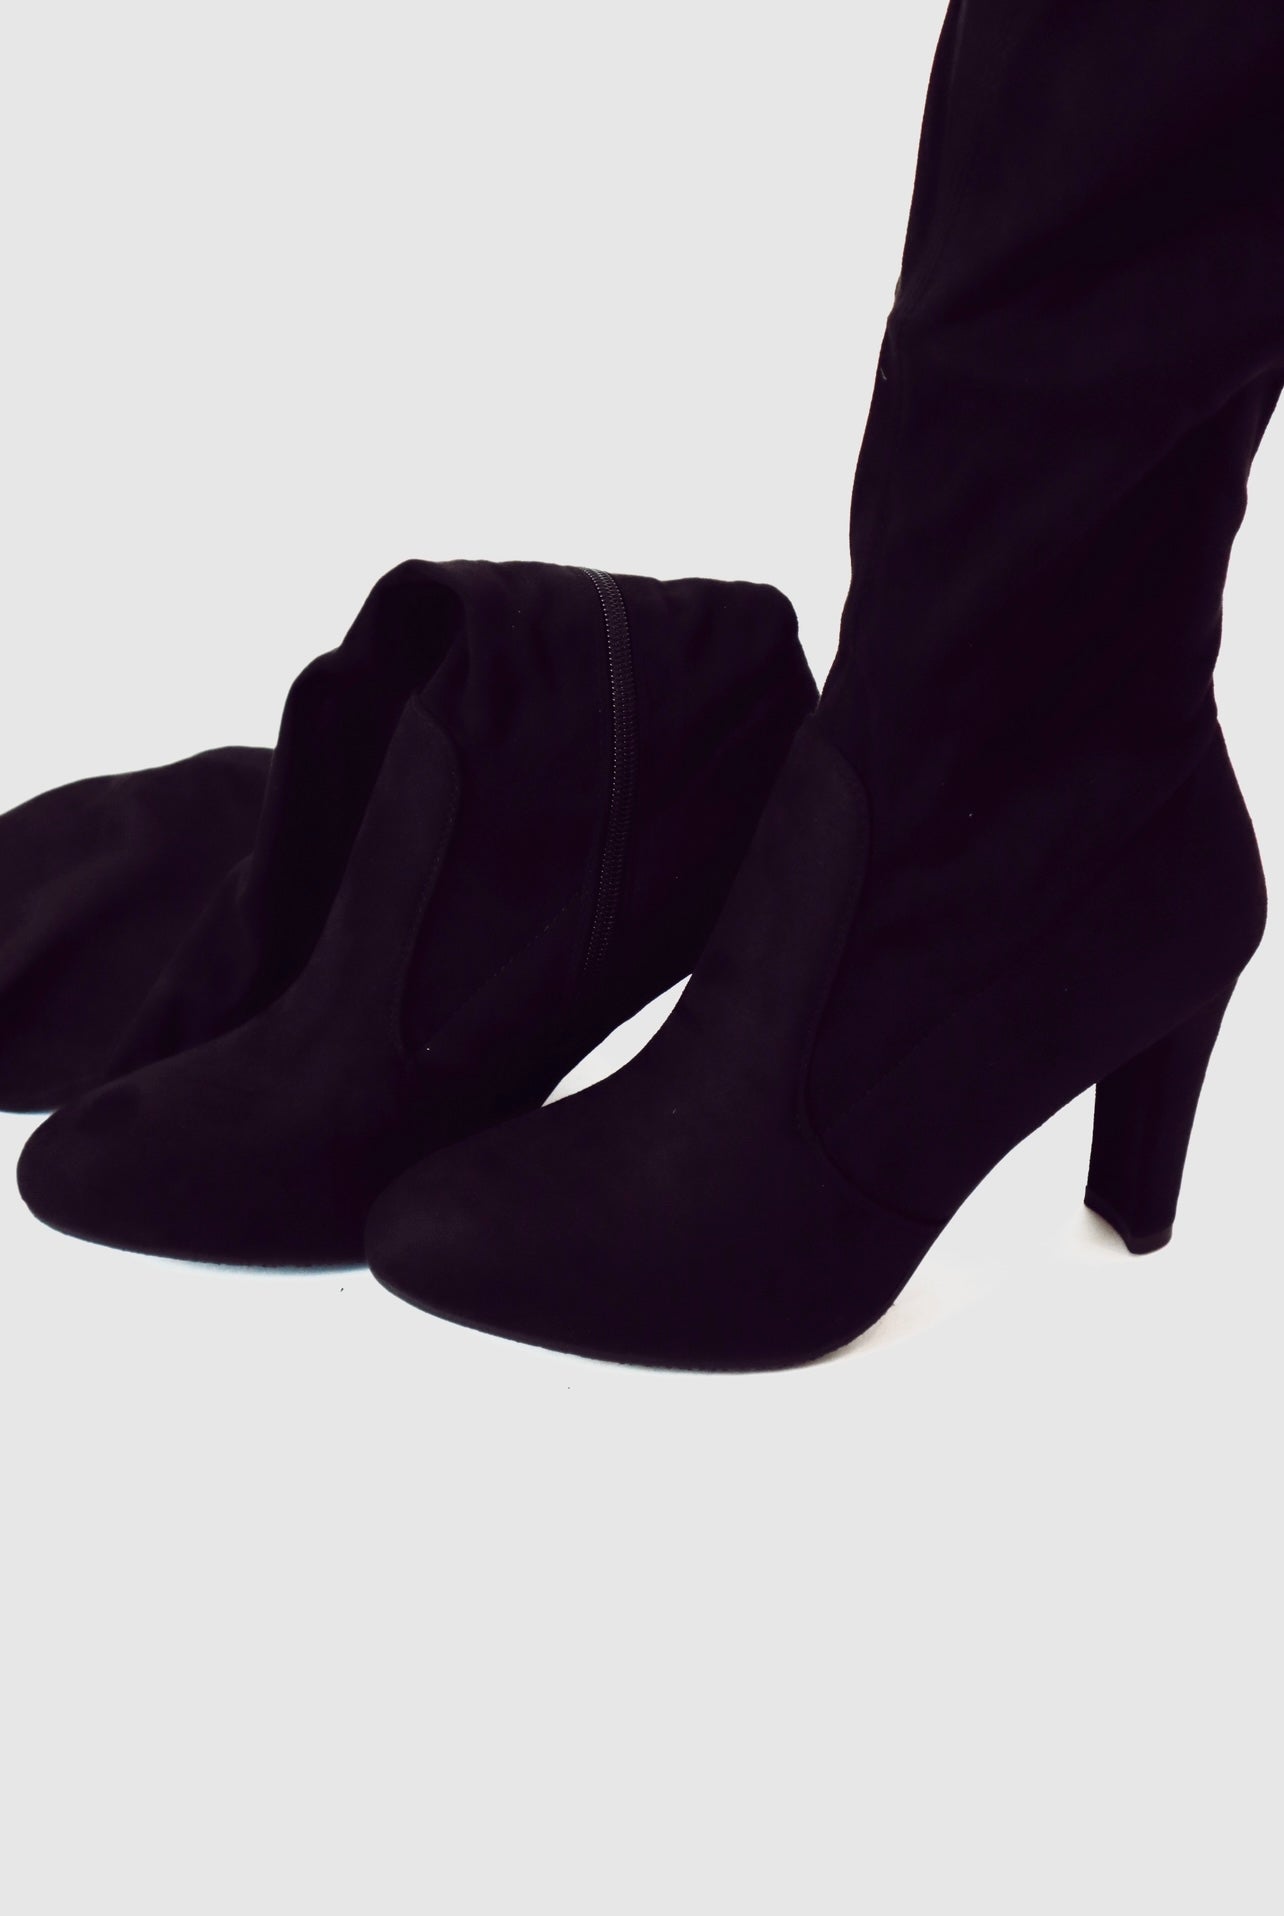 black suede thigh high boots - 10